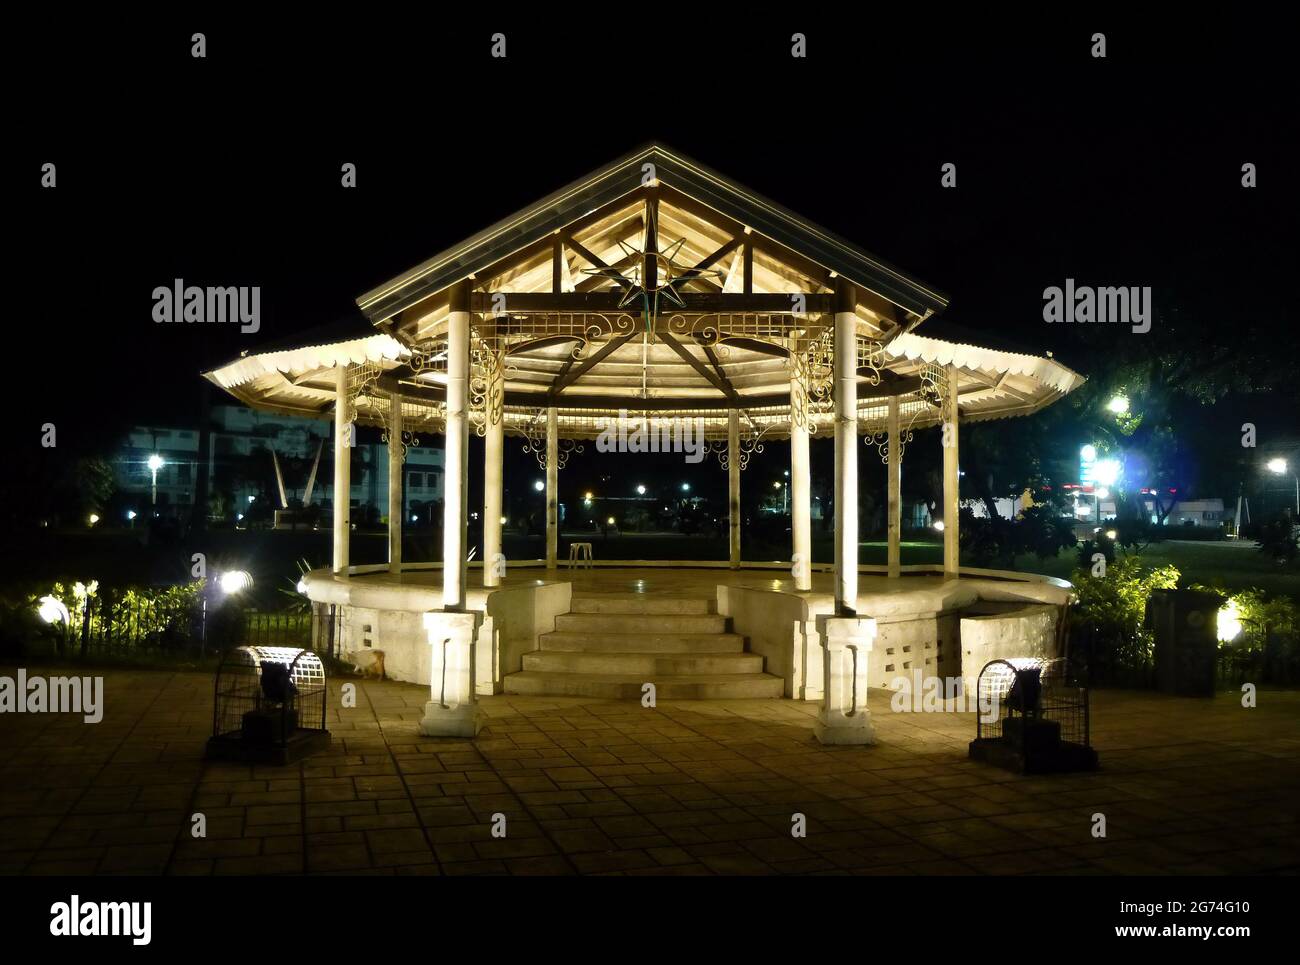 Cebu City, Philippines; Aug. 7, 2014 -- Night shot of elevated stage at Plaza Independencia, a historic public park near the waterfront. Stock Photo